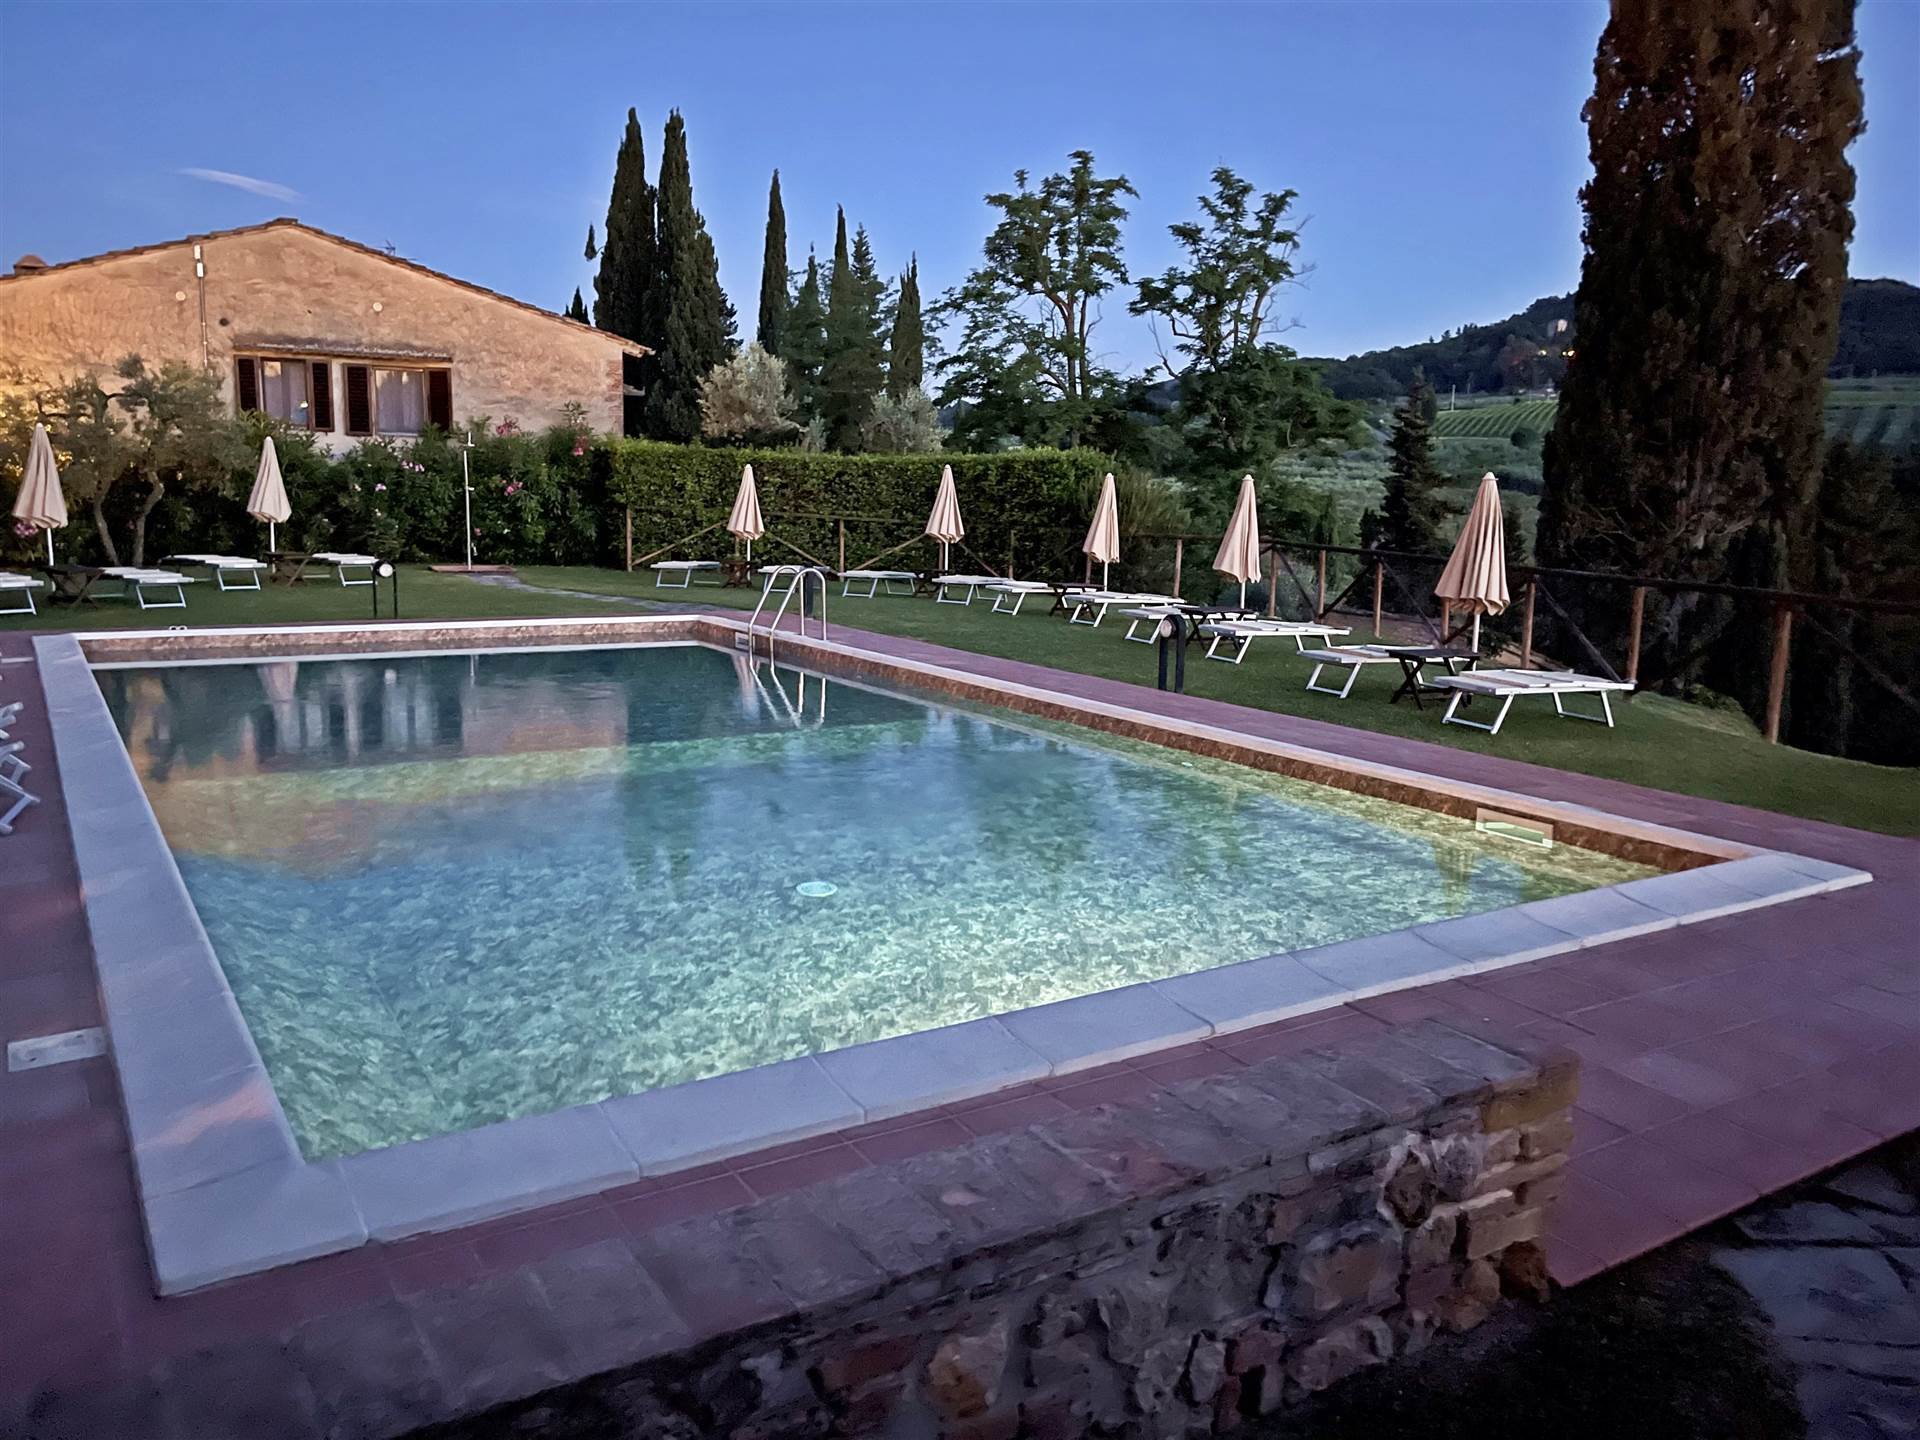 For sale cottage in quiet zone San Gimignano Toscana